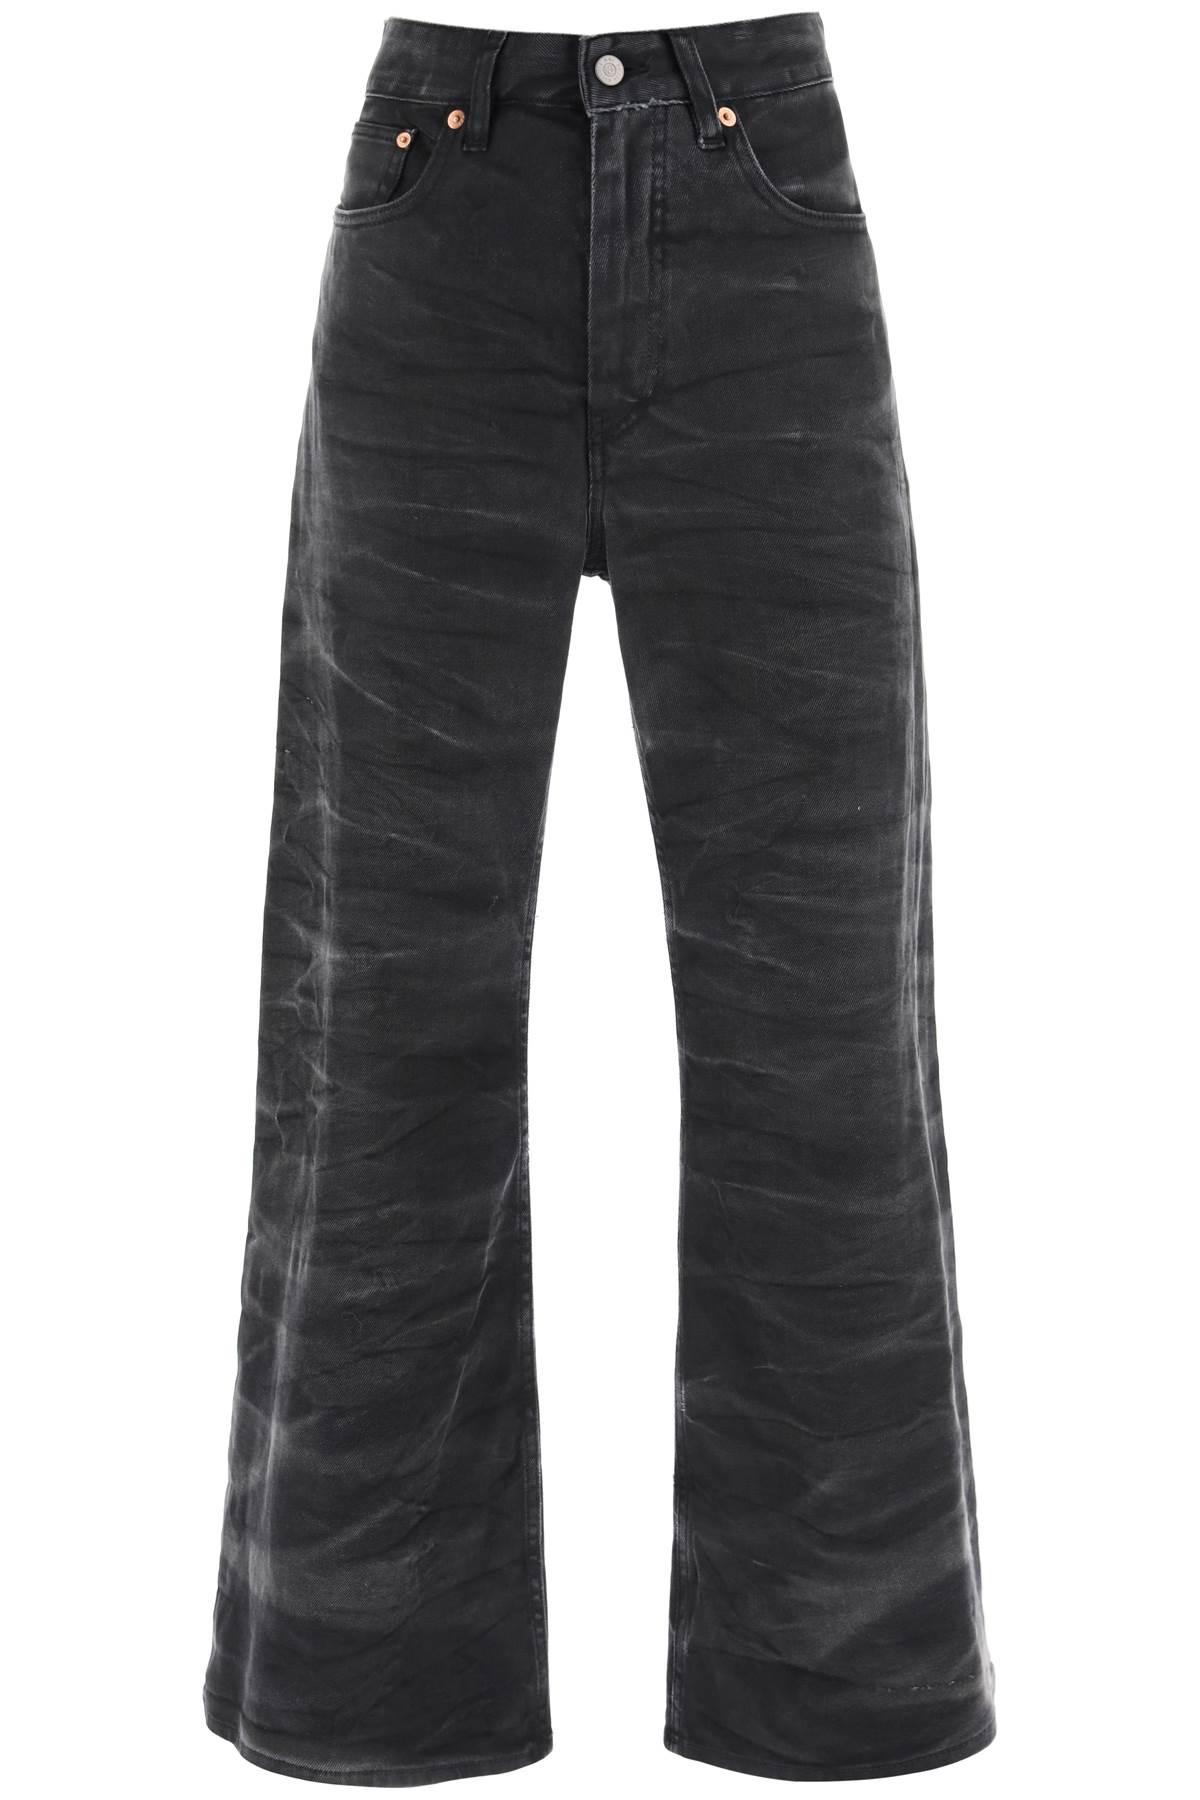 MM6 MAISON MARGIELA OVERSIZED JEANS WITH CRINKLE EFFECT